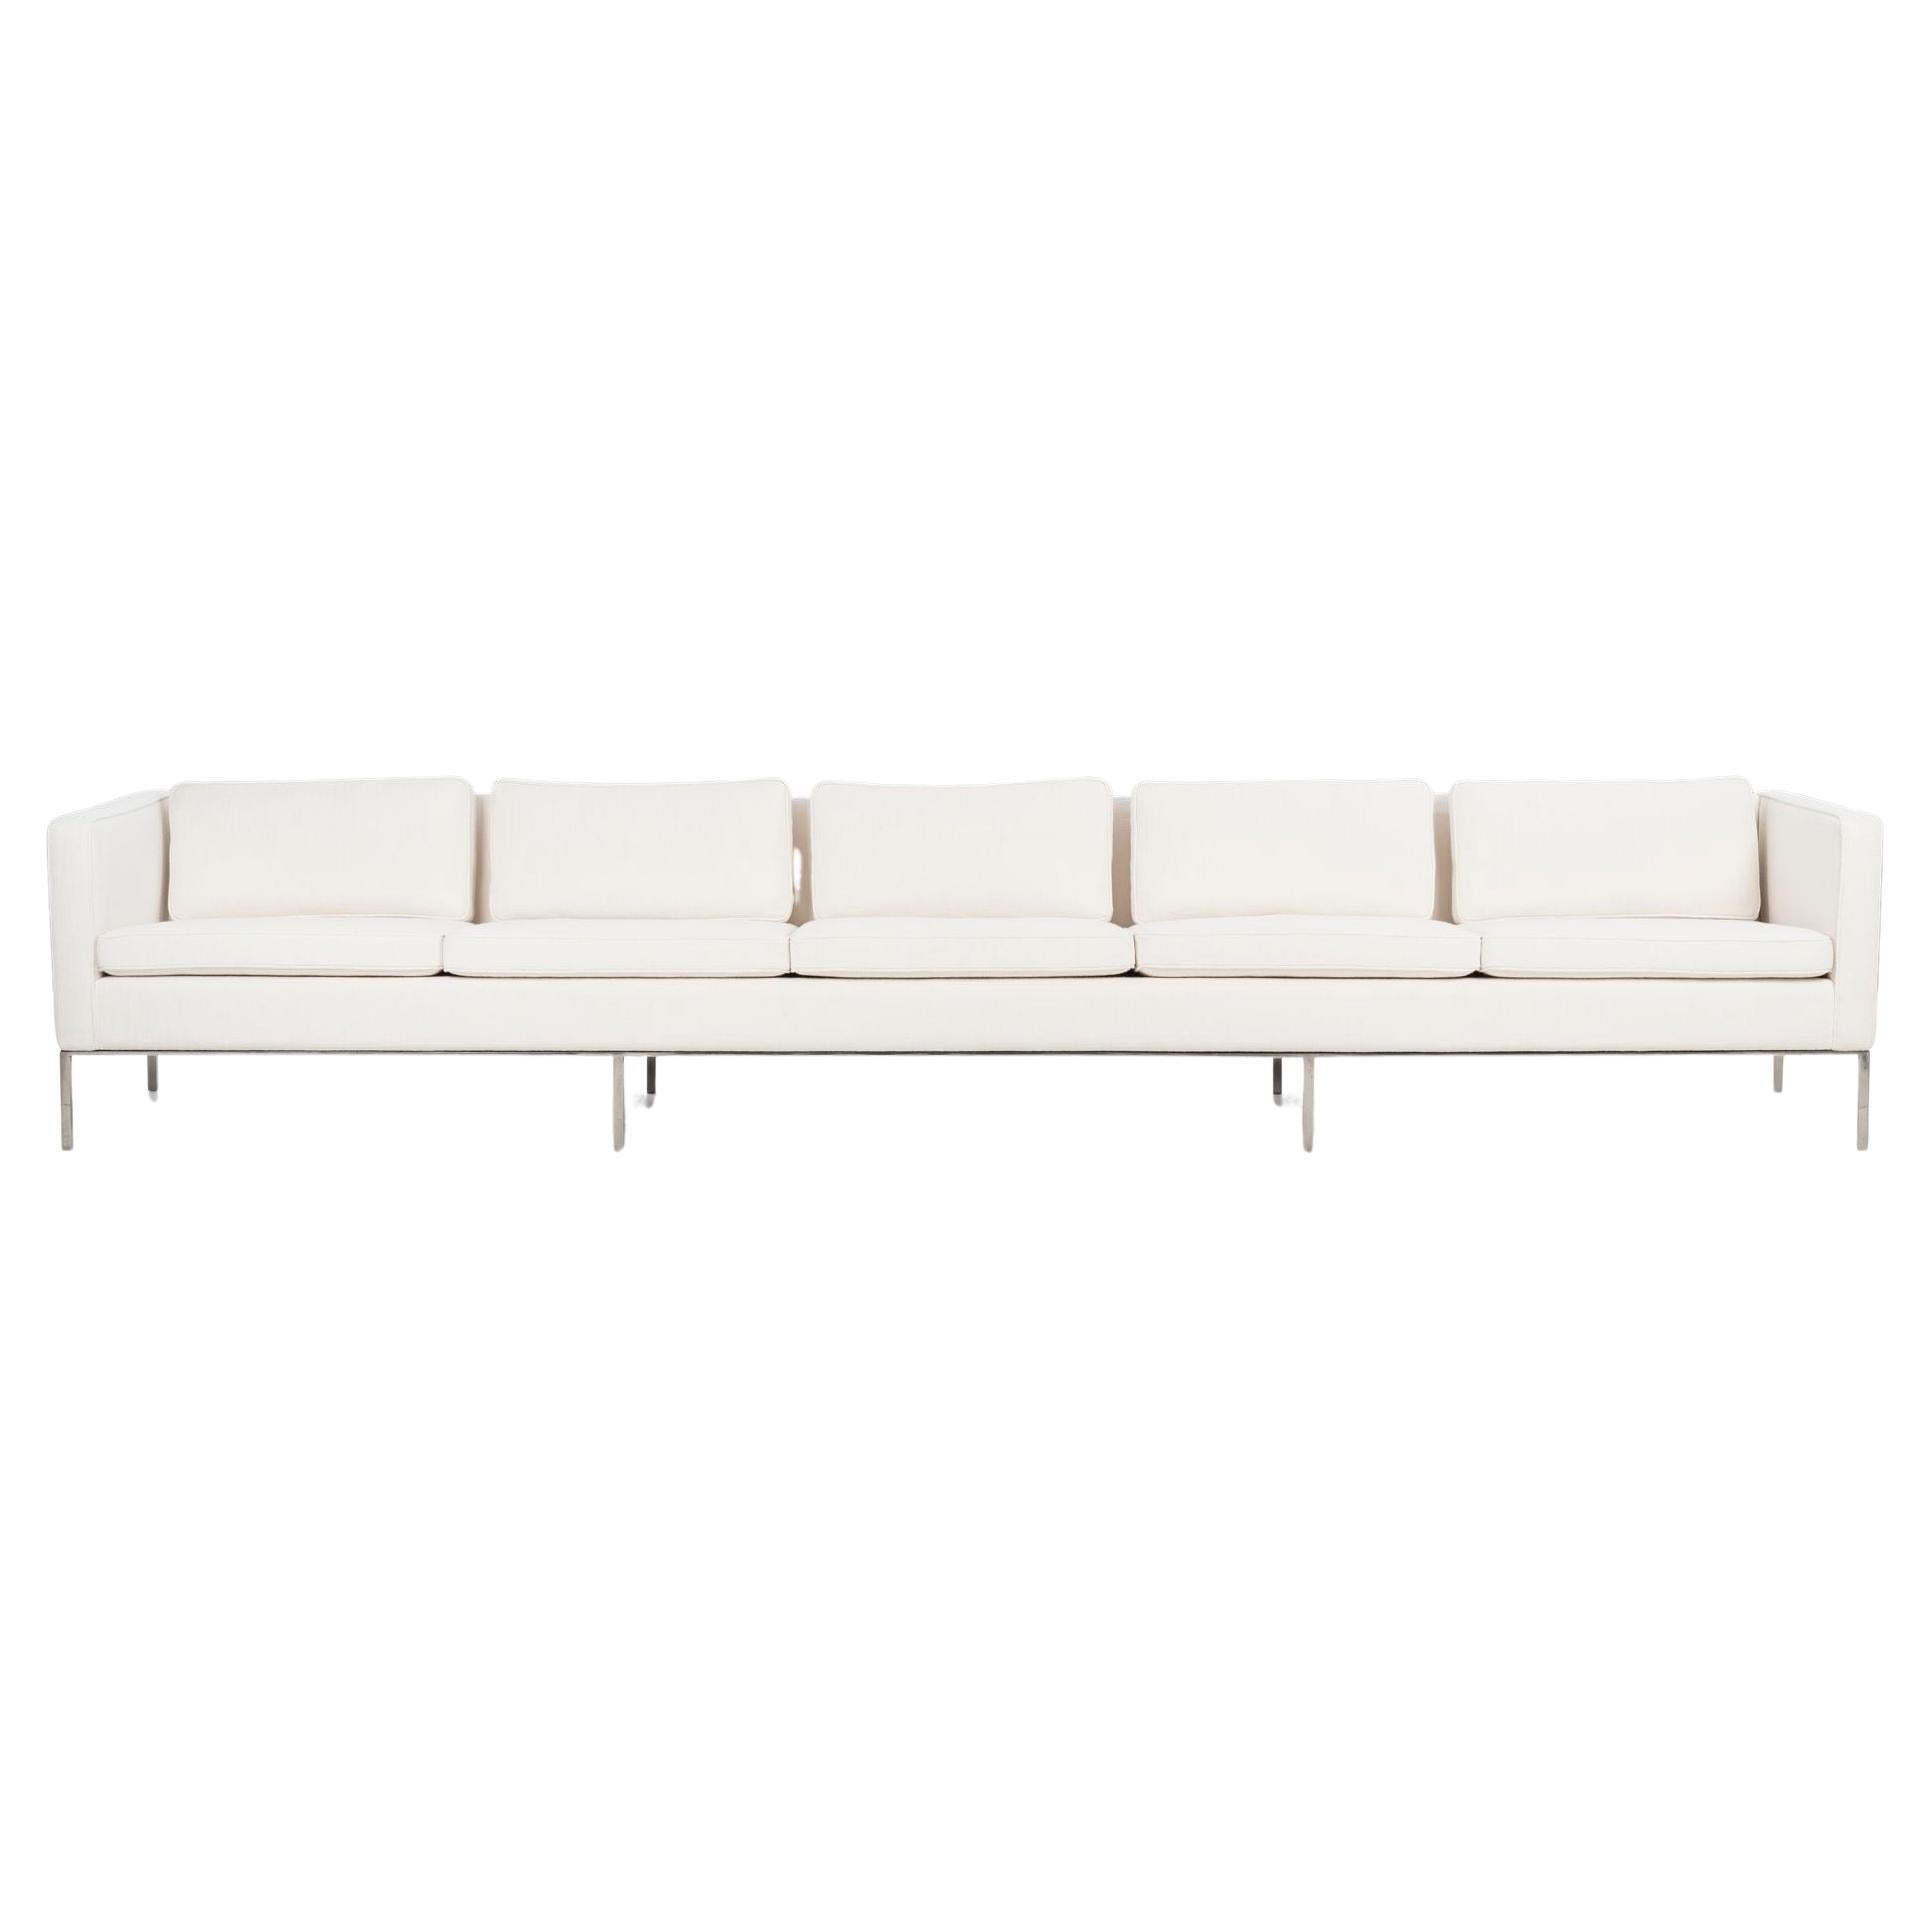 William Armbruster Monumental Five-Seat Sofa for Chase Manhattan Executive Offic For Sale